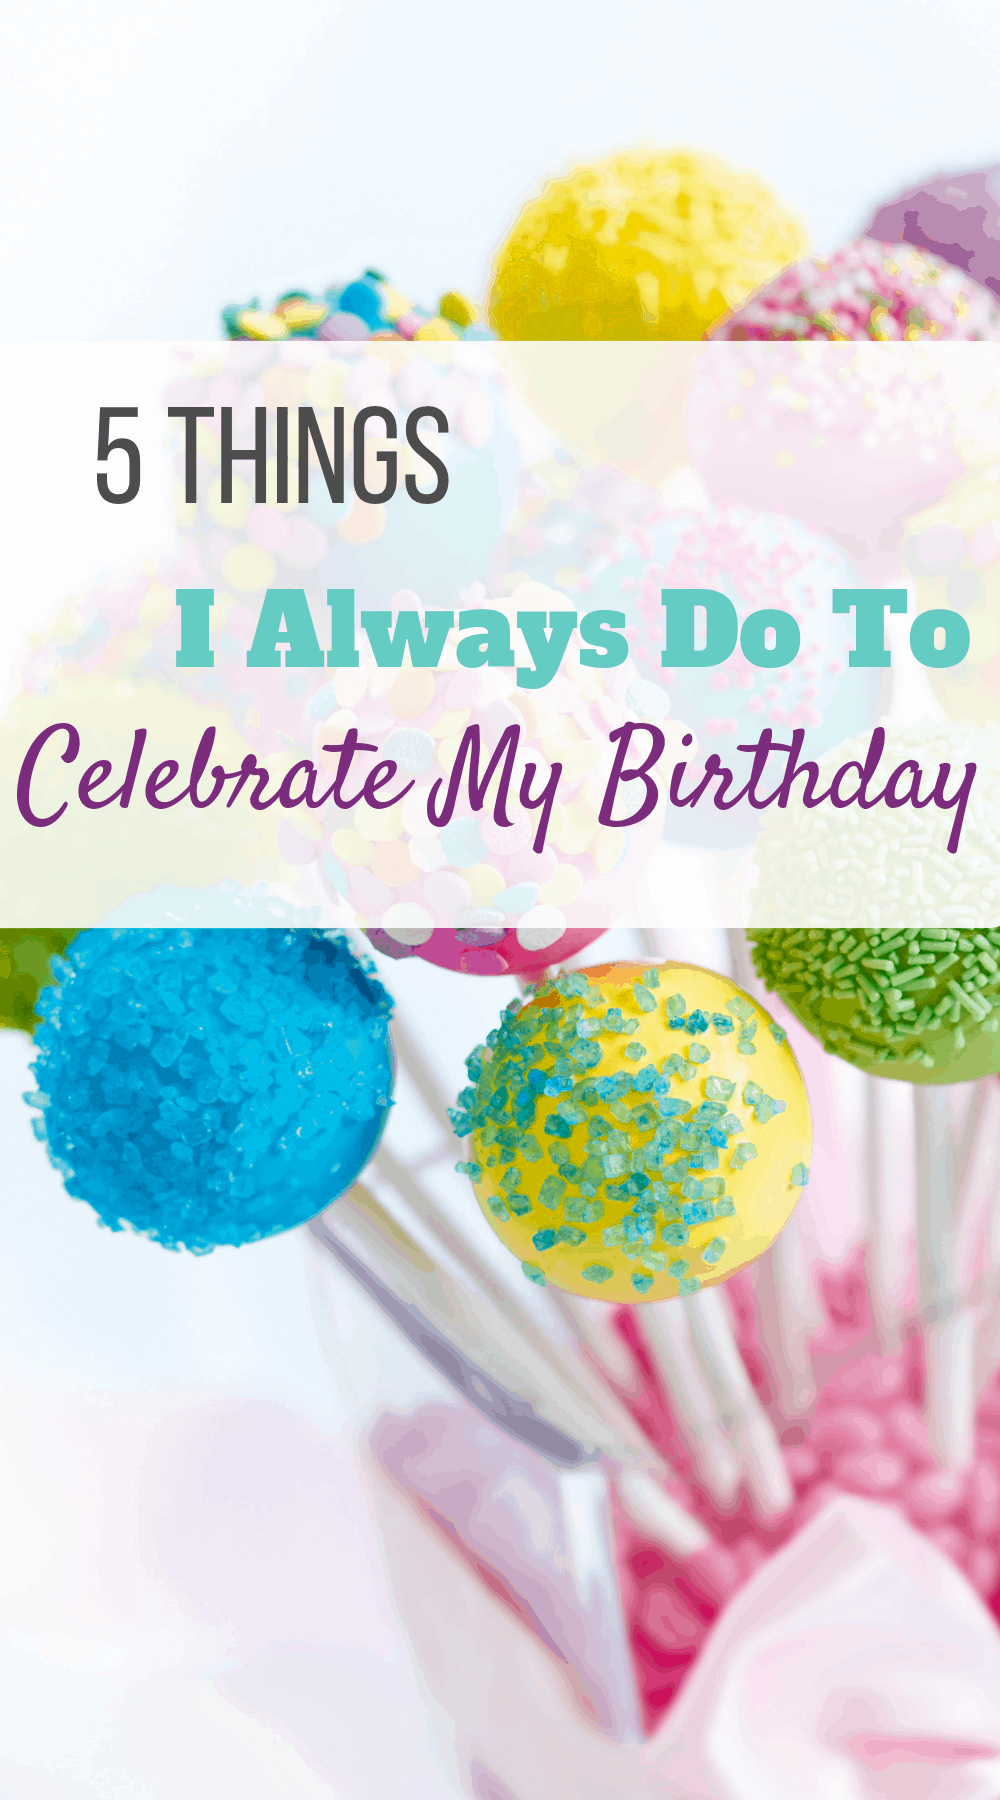 5 Things I Always Do To Celebrate My Birthday Month - Miss Sue Living